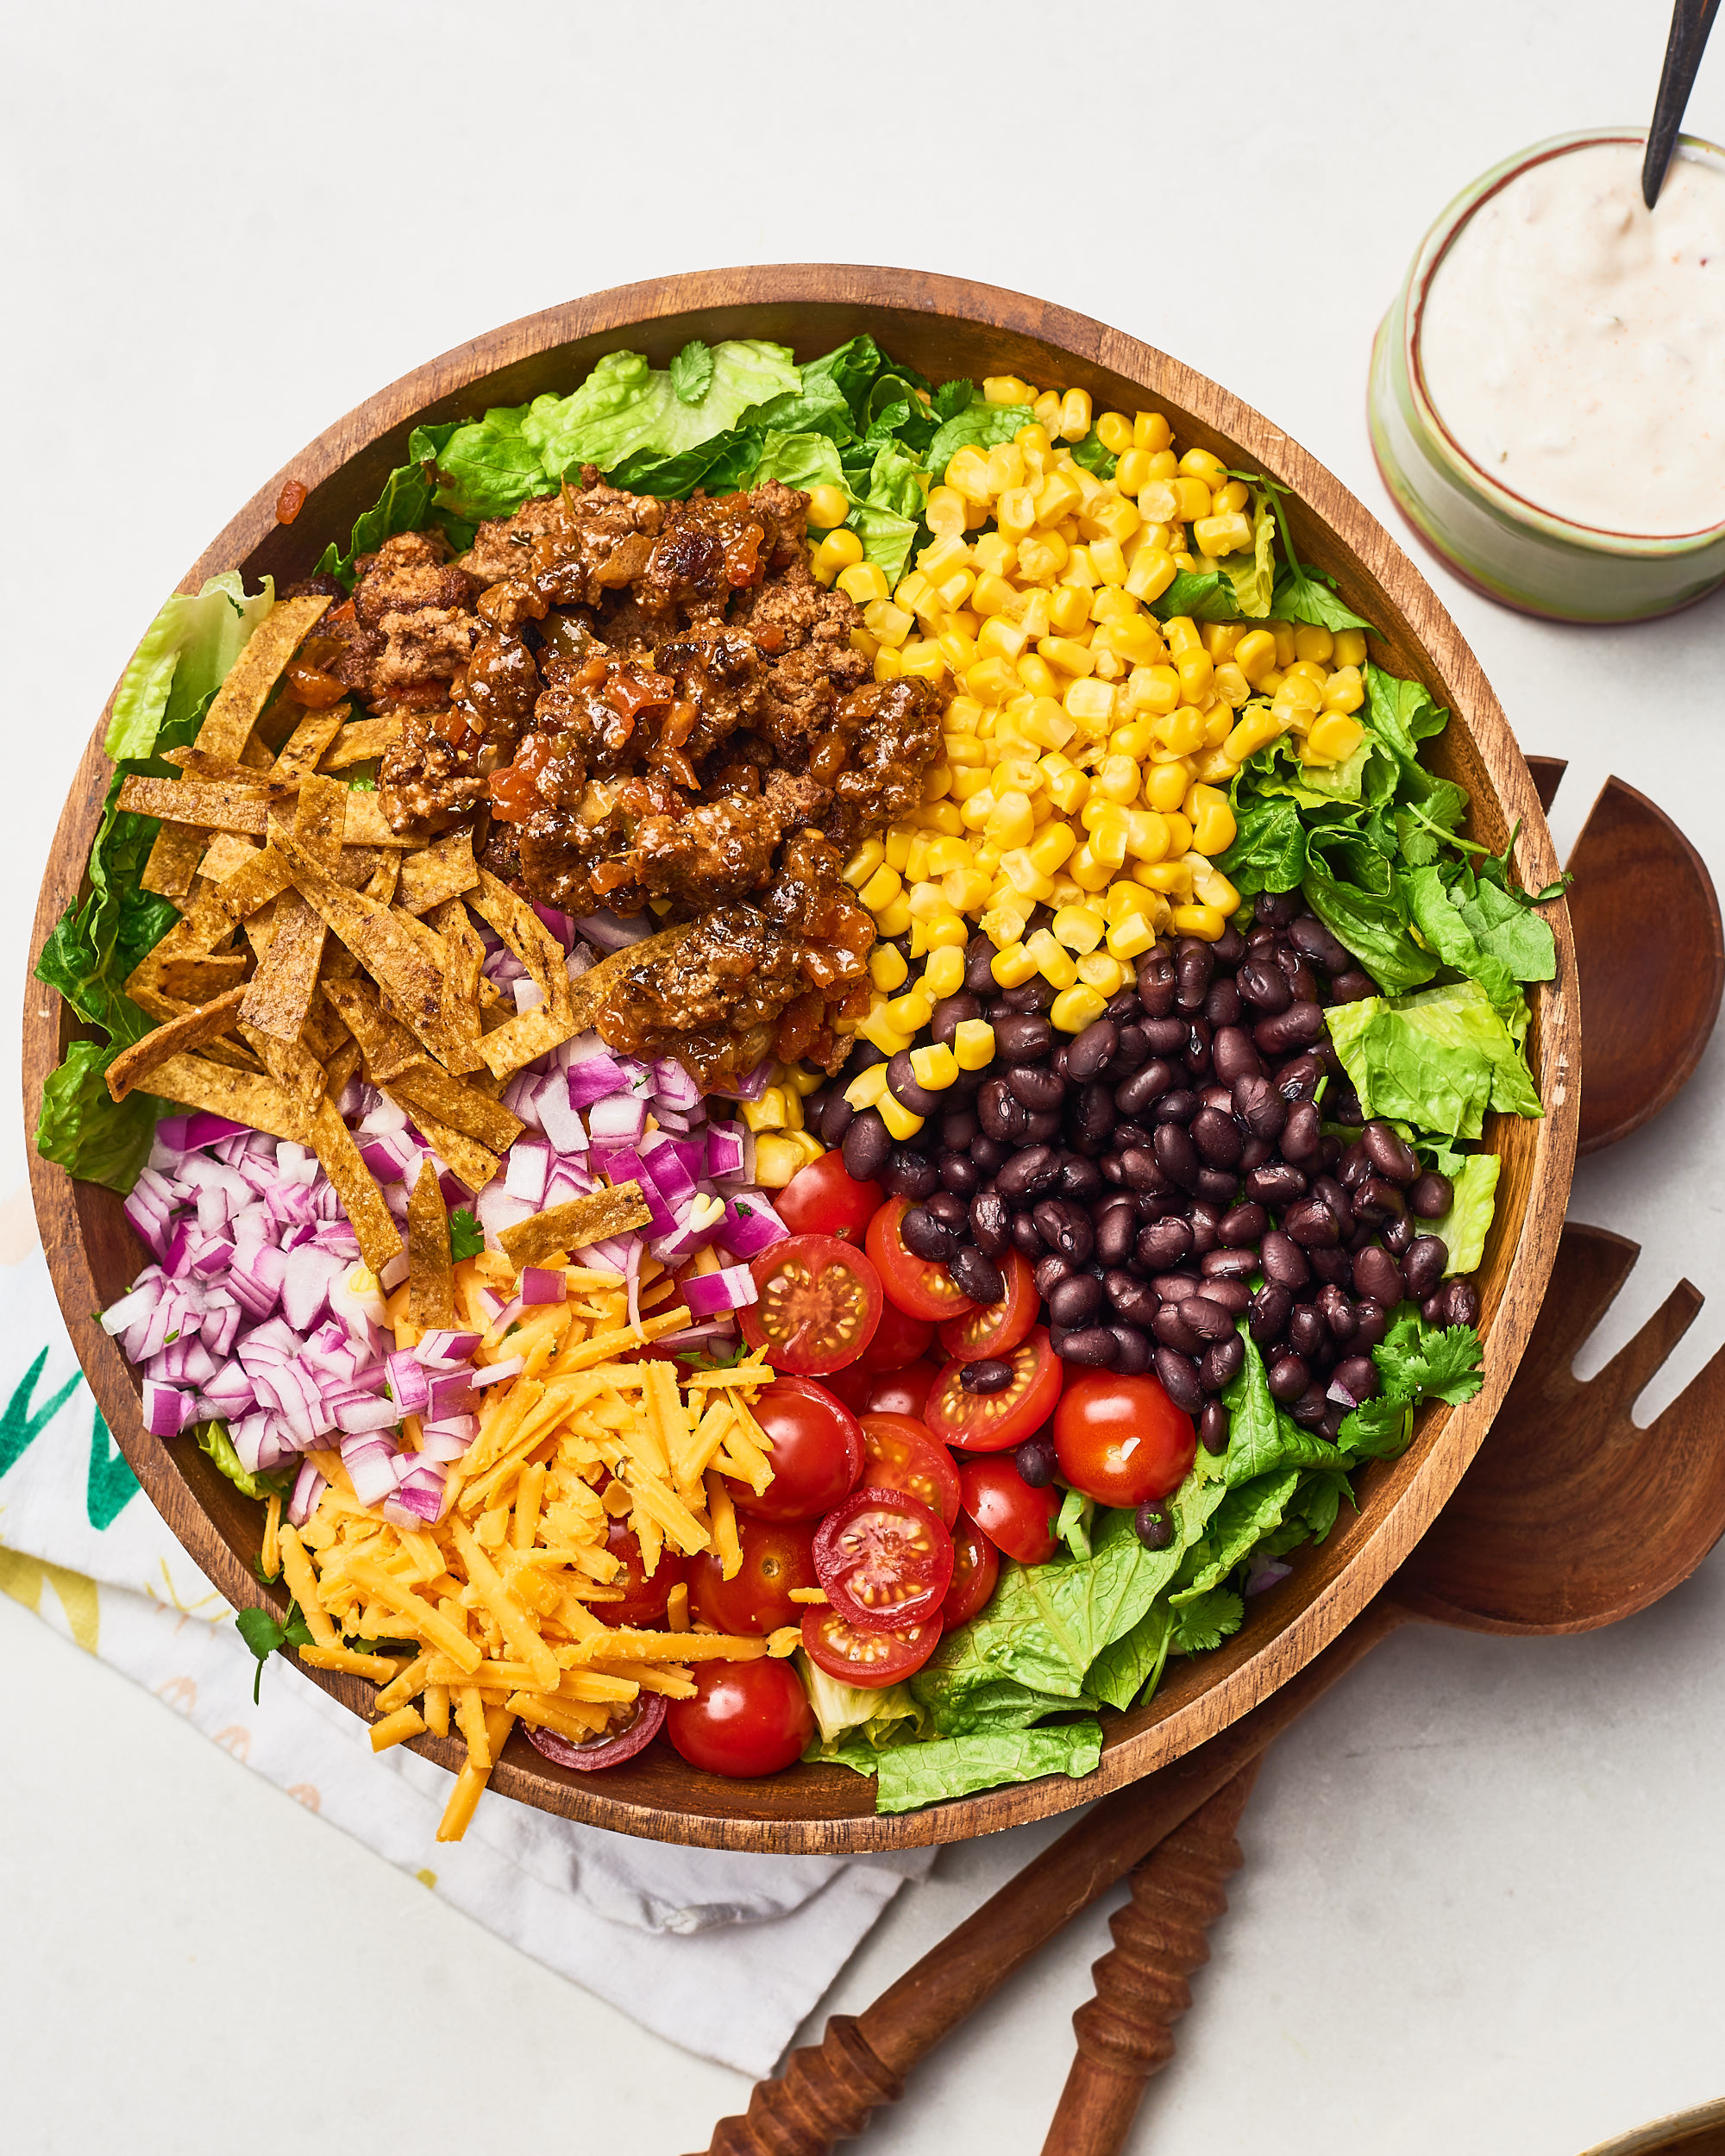 How To Make the Best Restaurant-Quality Taco Salad at Home